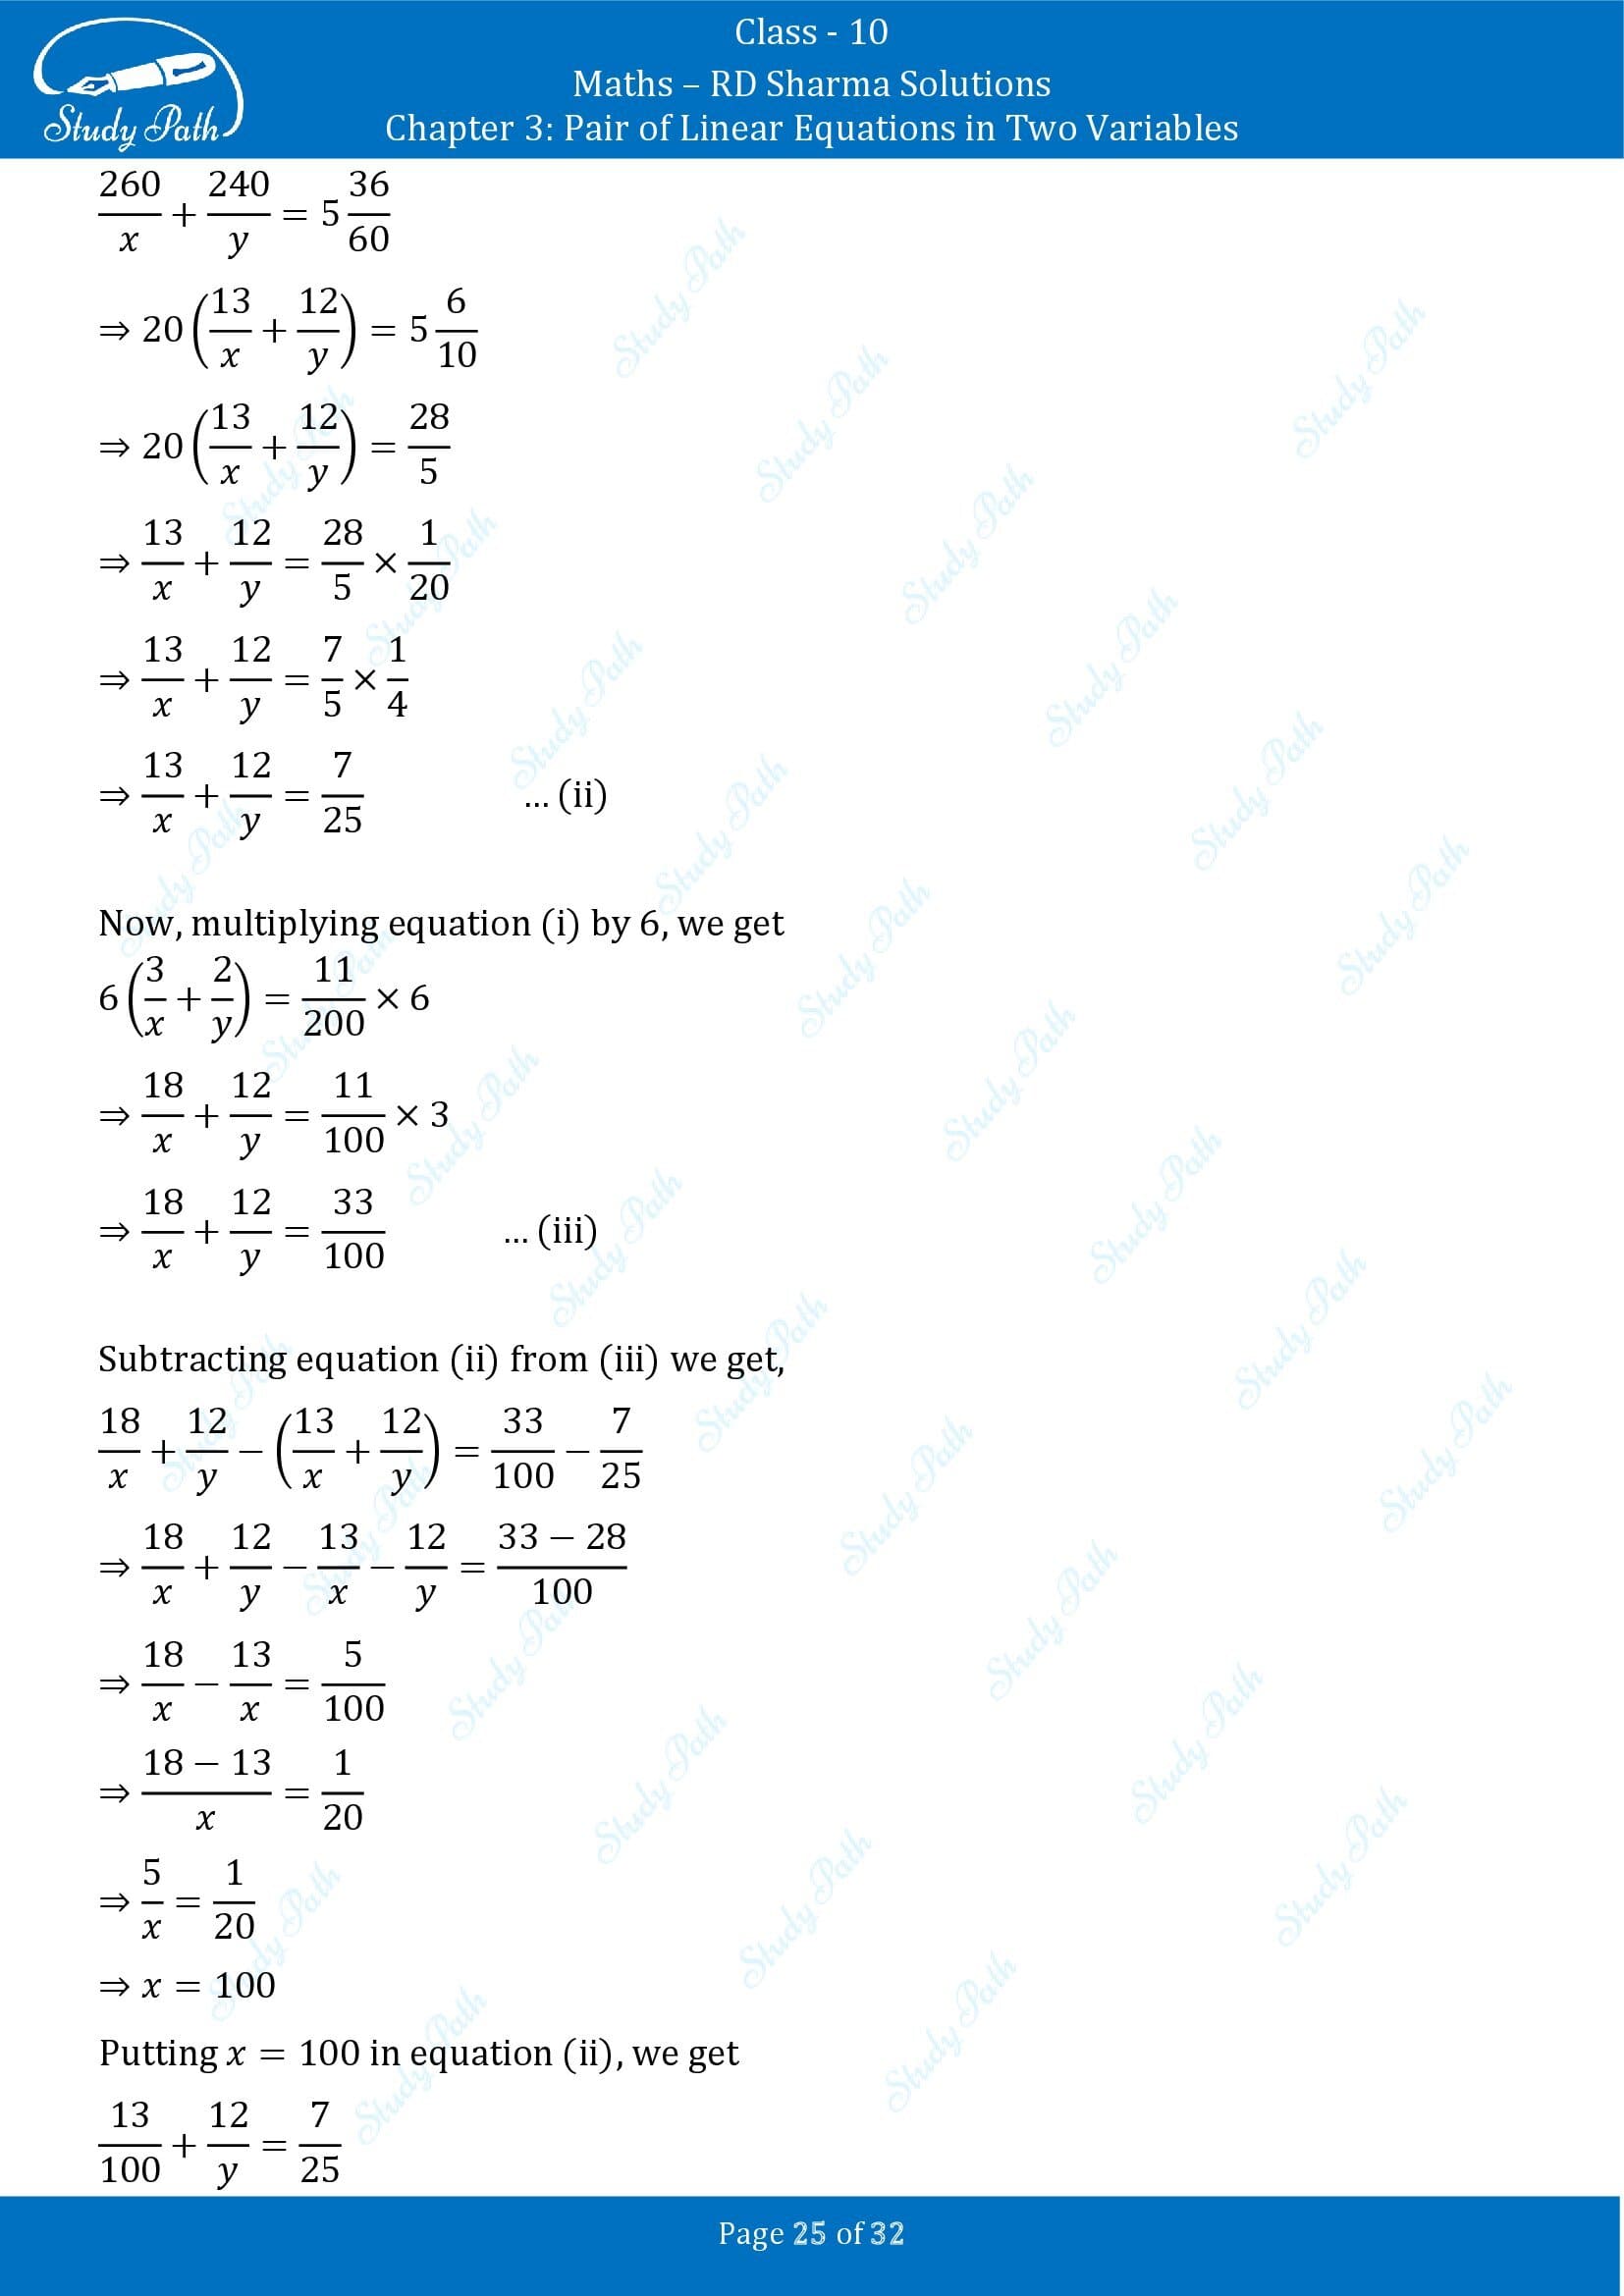 RD Sharma Solutions Class 10 Chapter 3 Pair of Linear Equations in Two Variables Exercise 3.10 00025